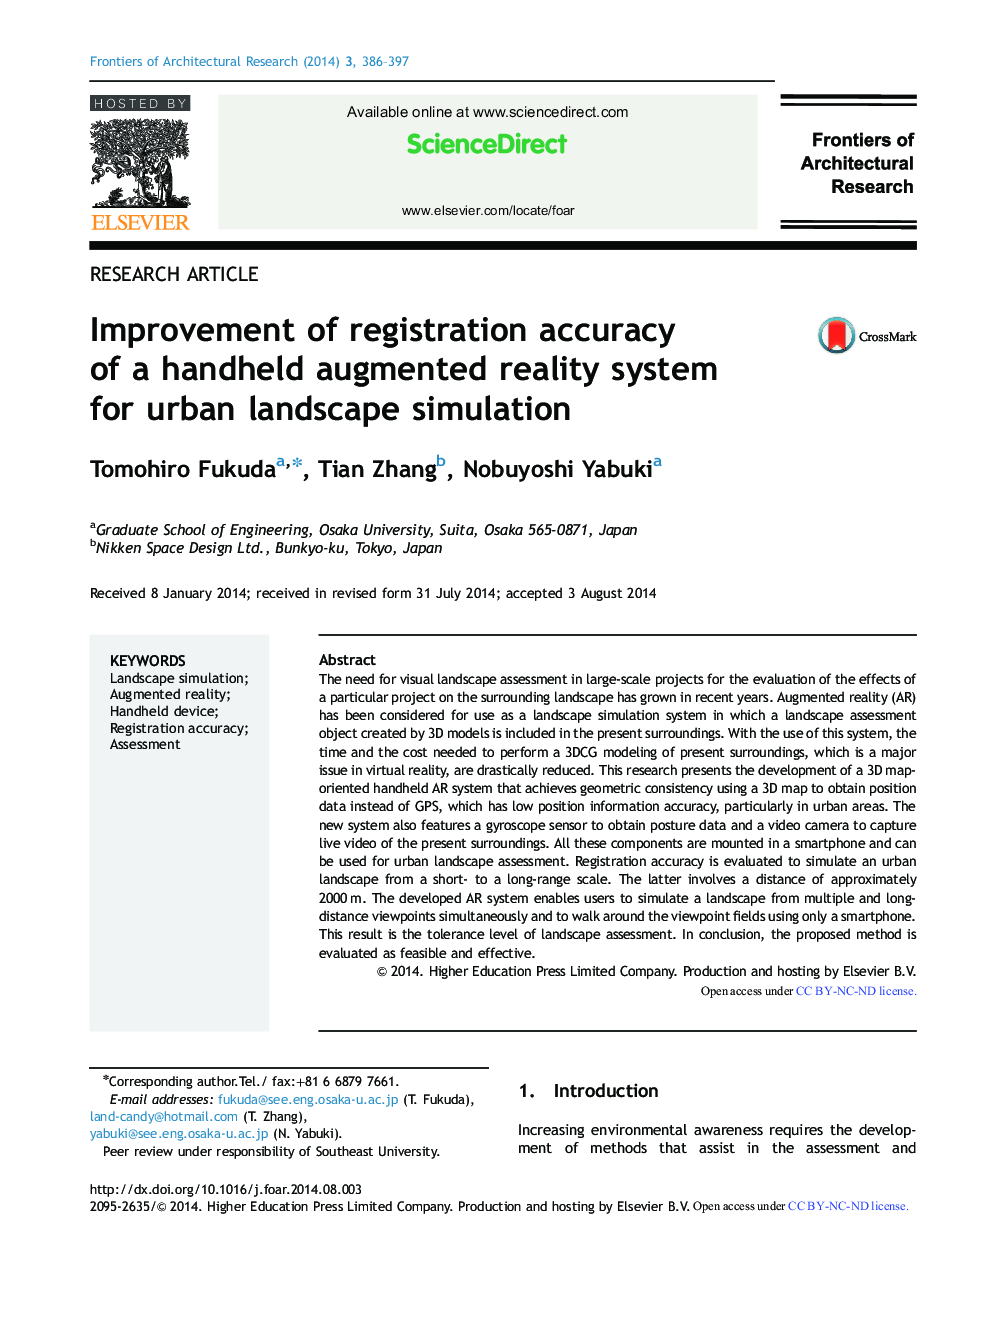 Improvement of registration accuracy of a handheld augmented reality system for urban landscape simulation 